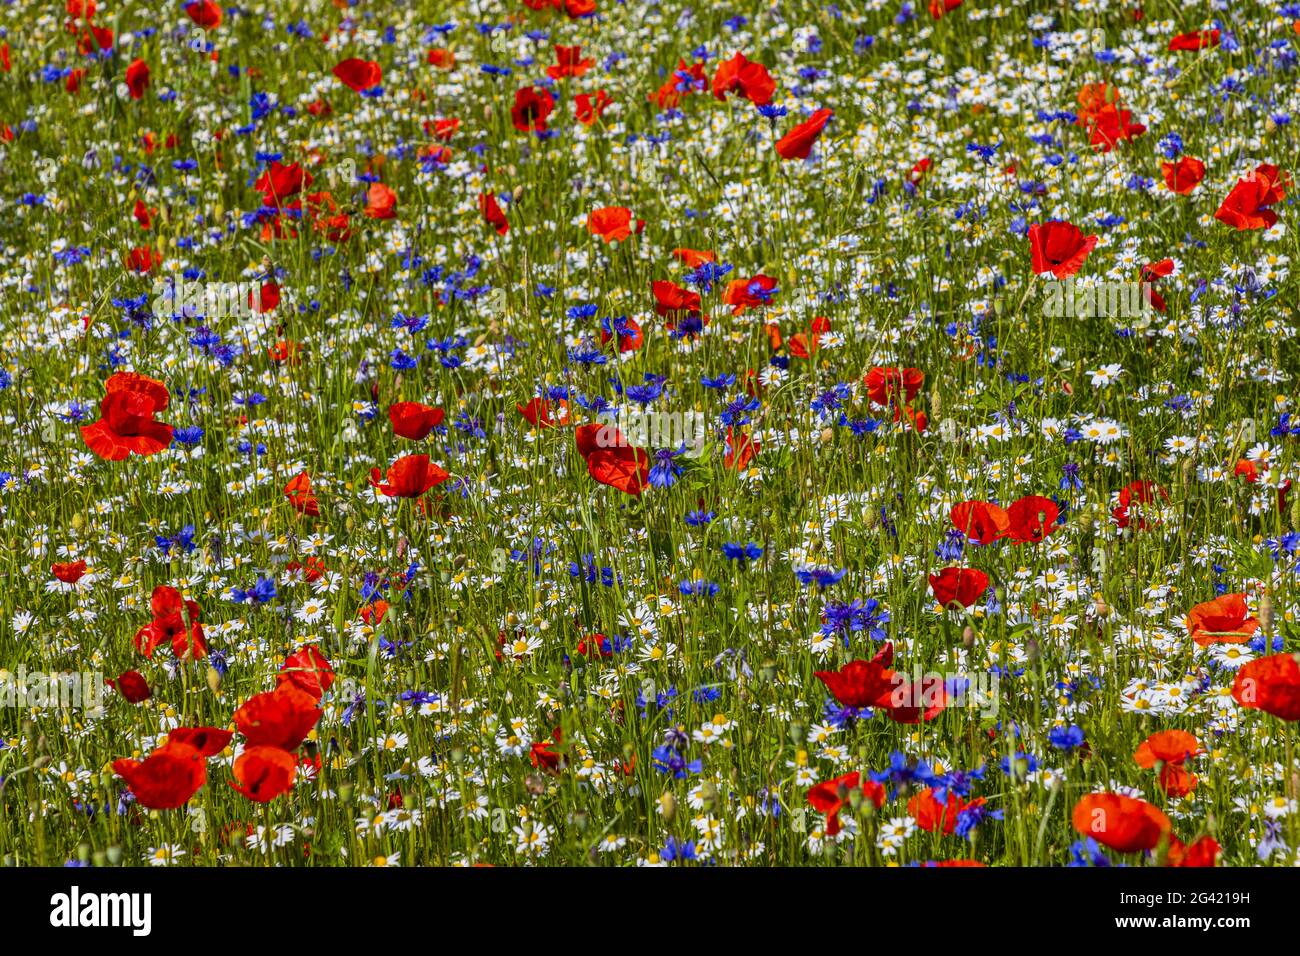 Flower meadow with poppies, cornflowers, daisies and marguerite Stock Photo